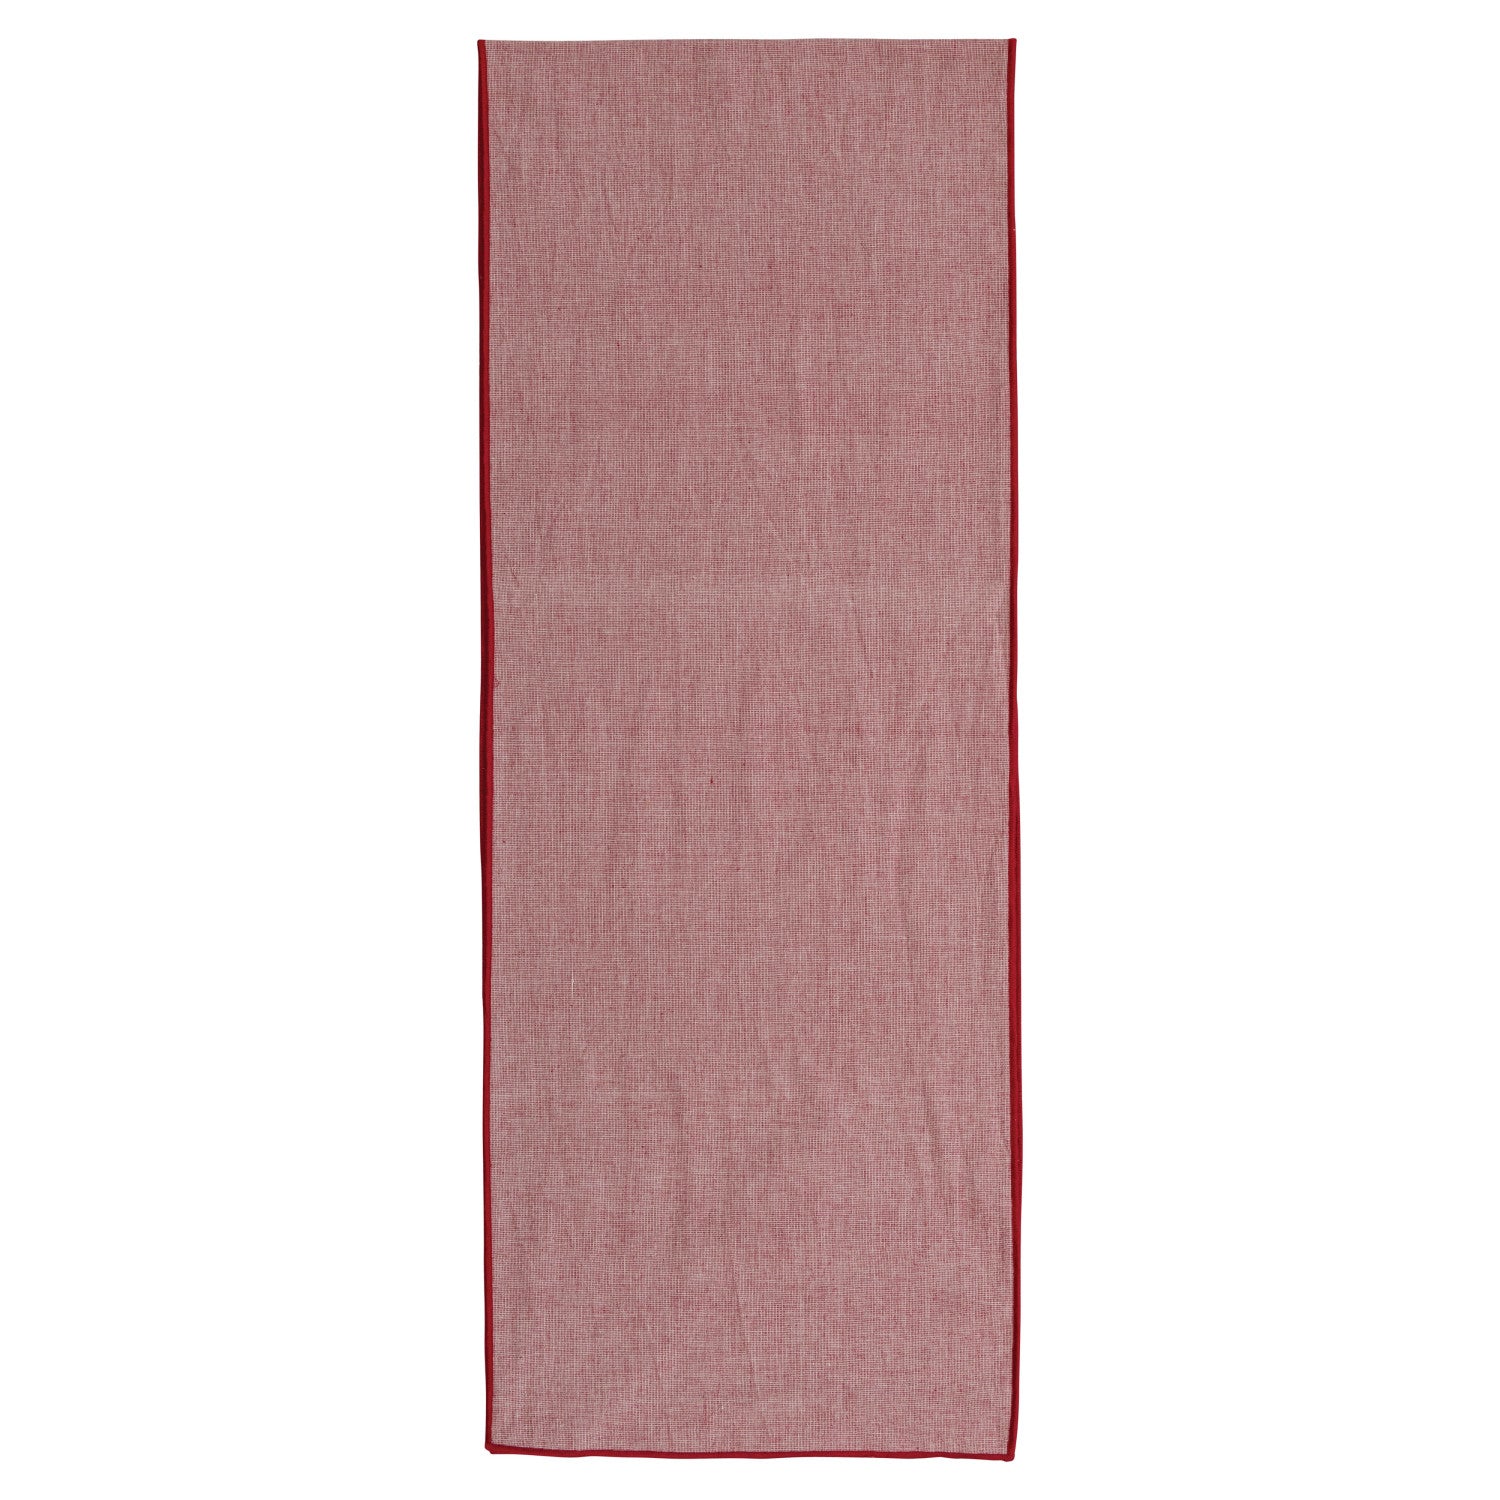 72"L x 14"W Woven Cotton Table Runner Red